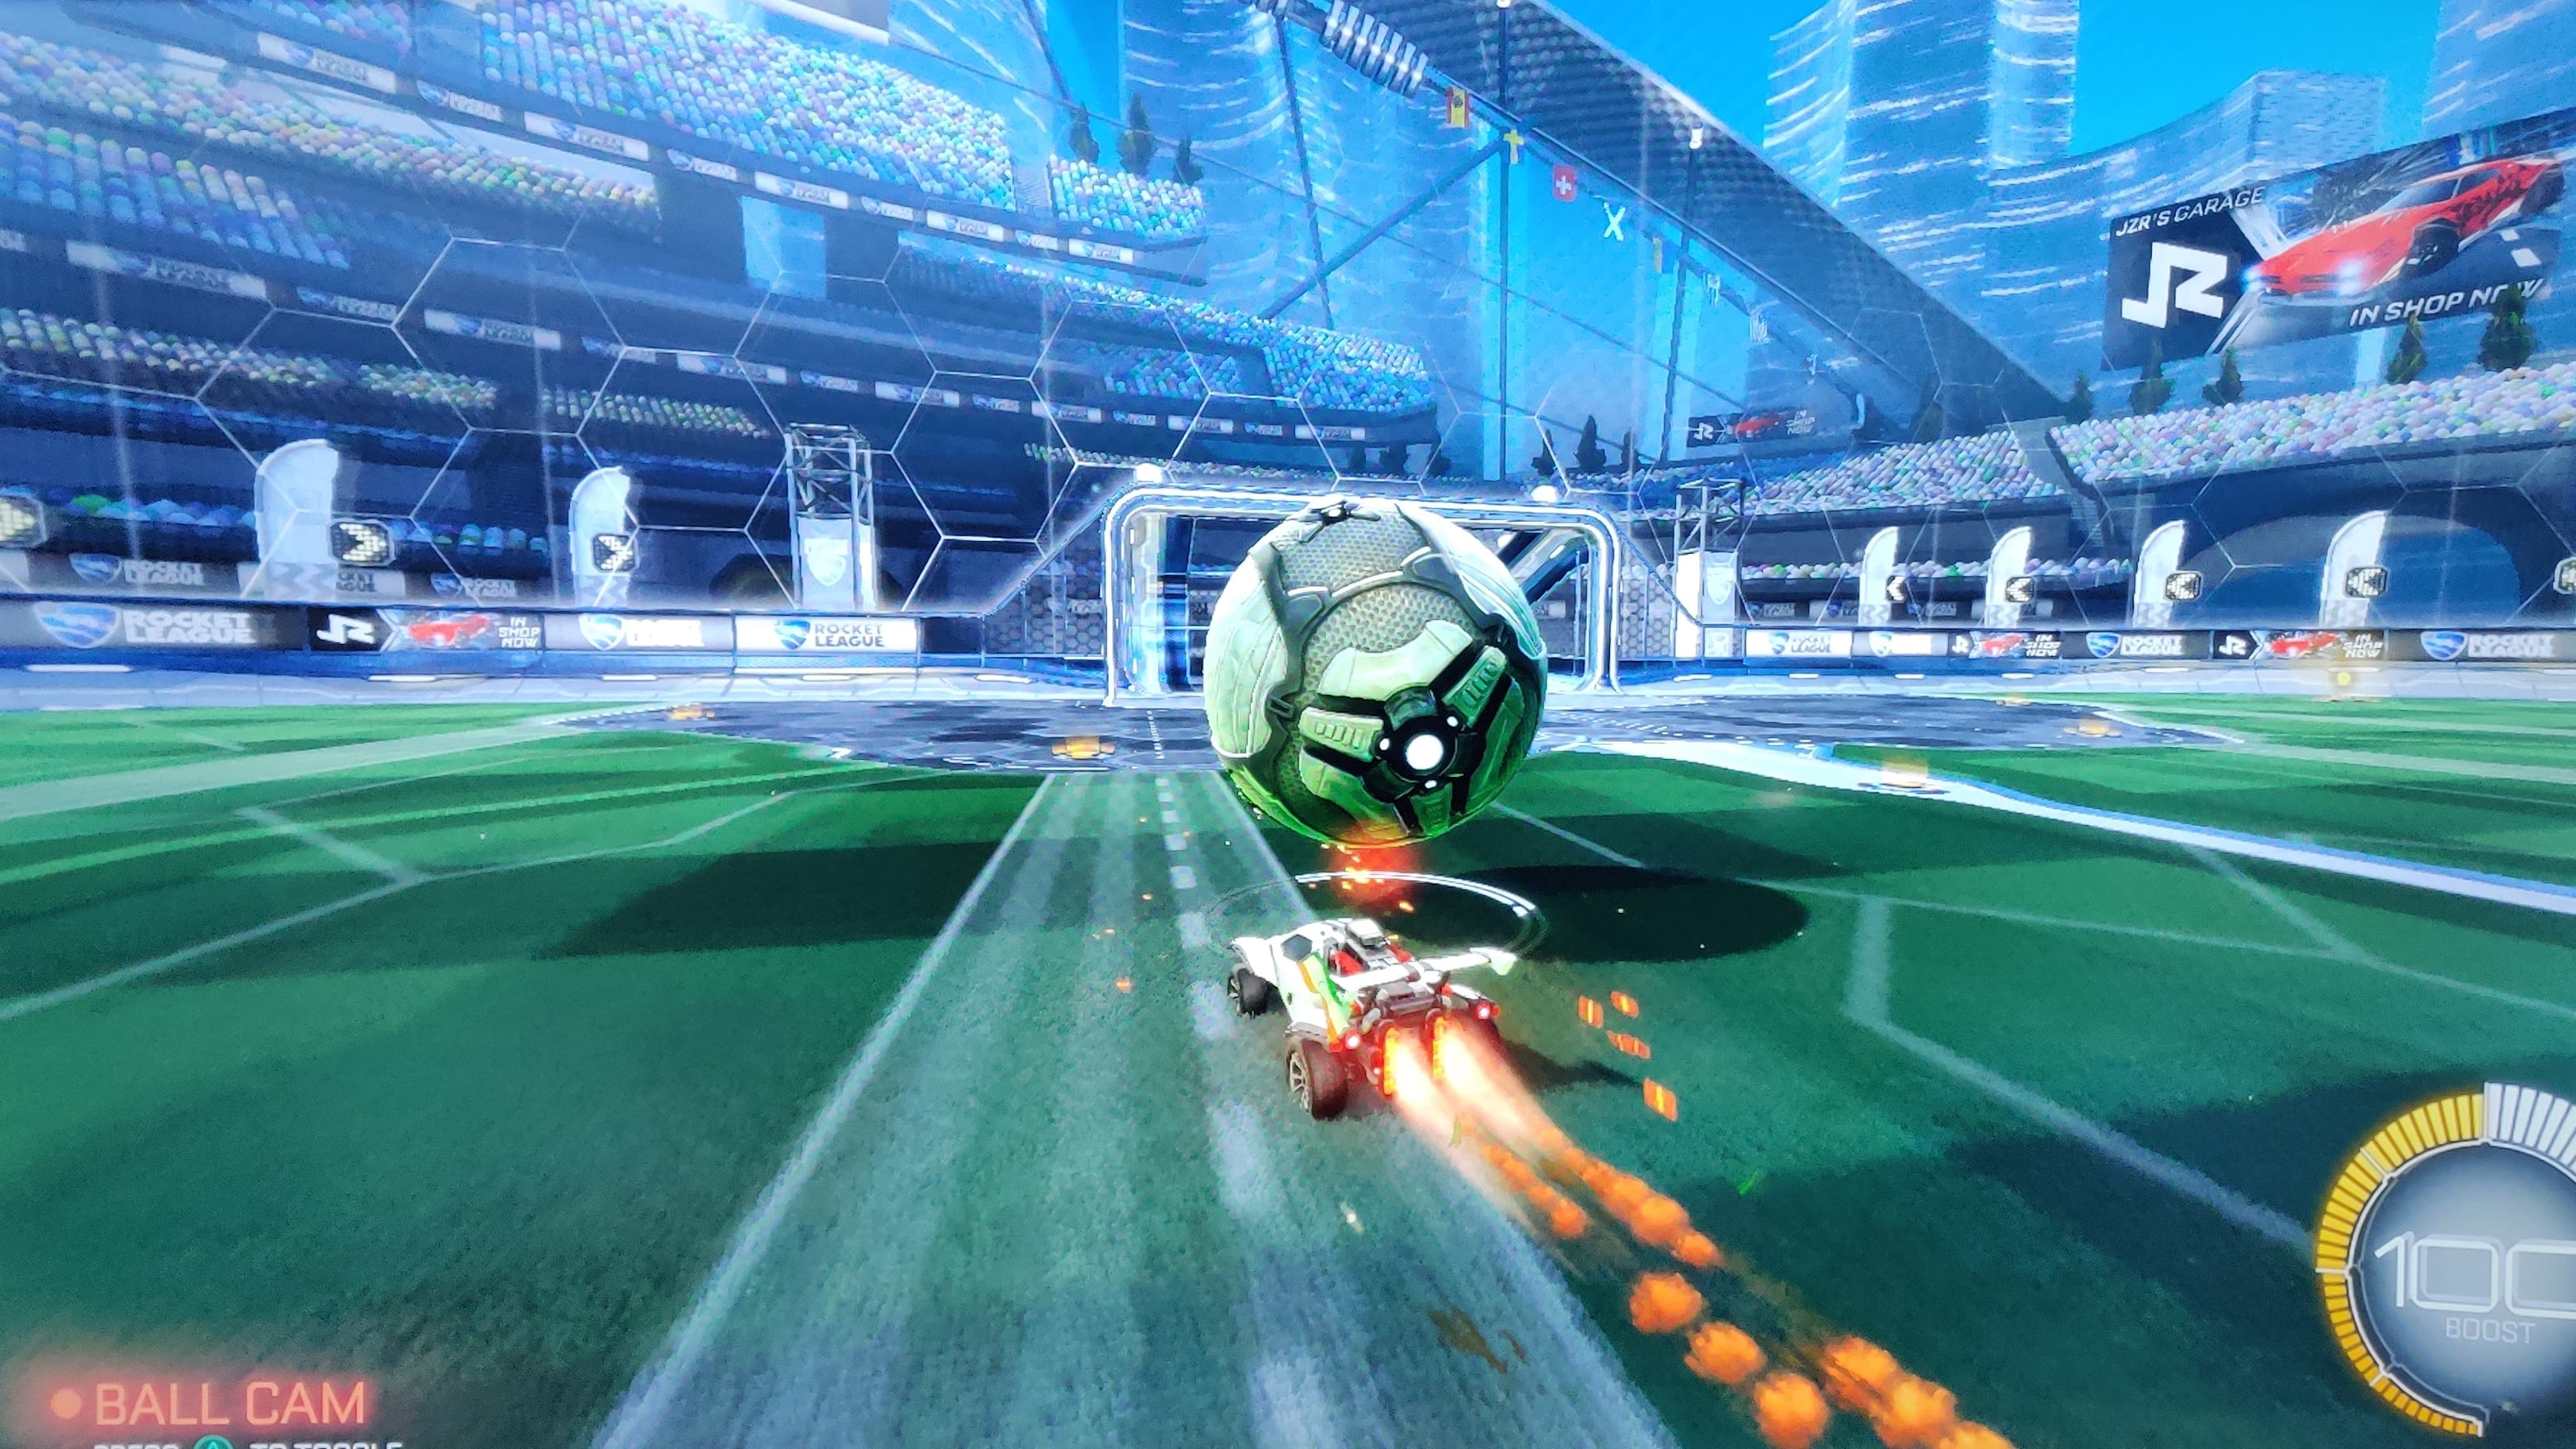 CODball, the new Rocket League game mode on MW2!